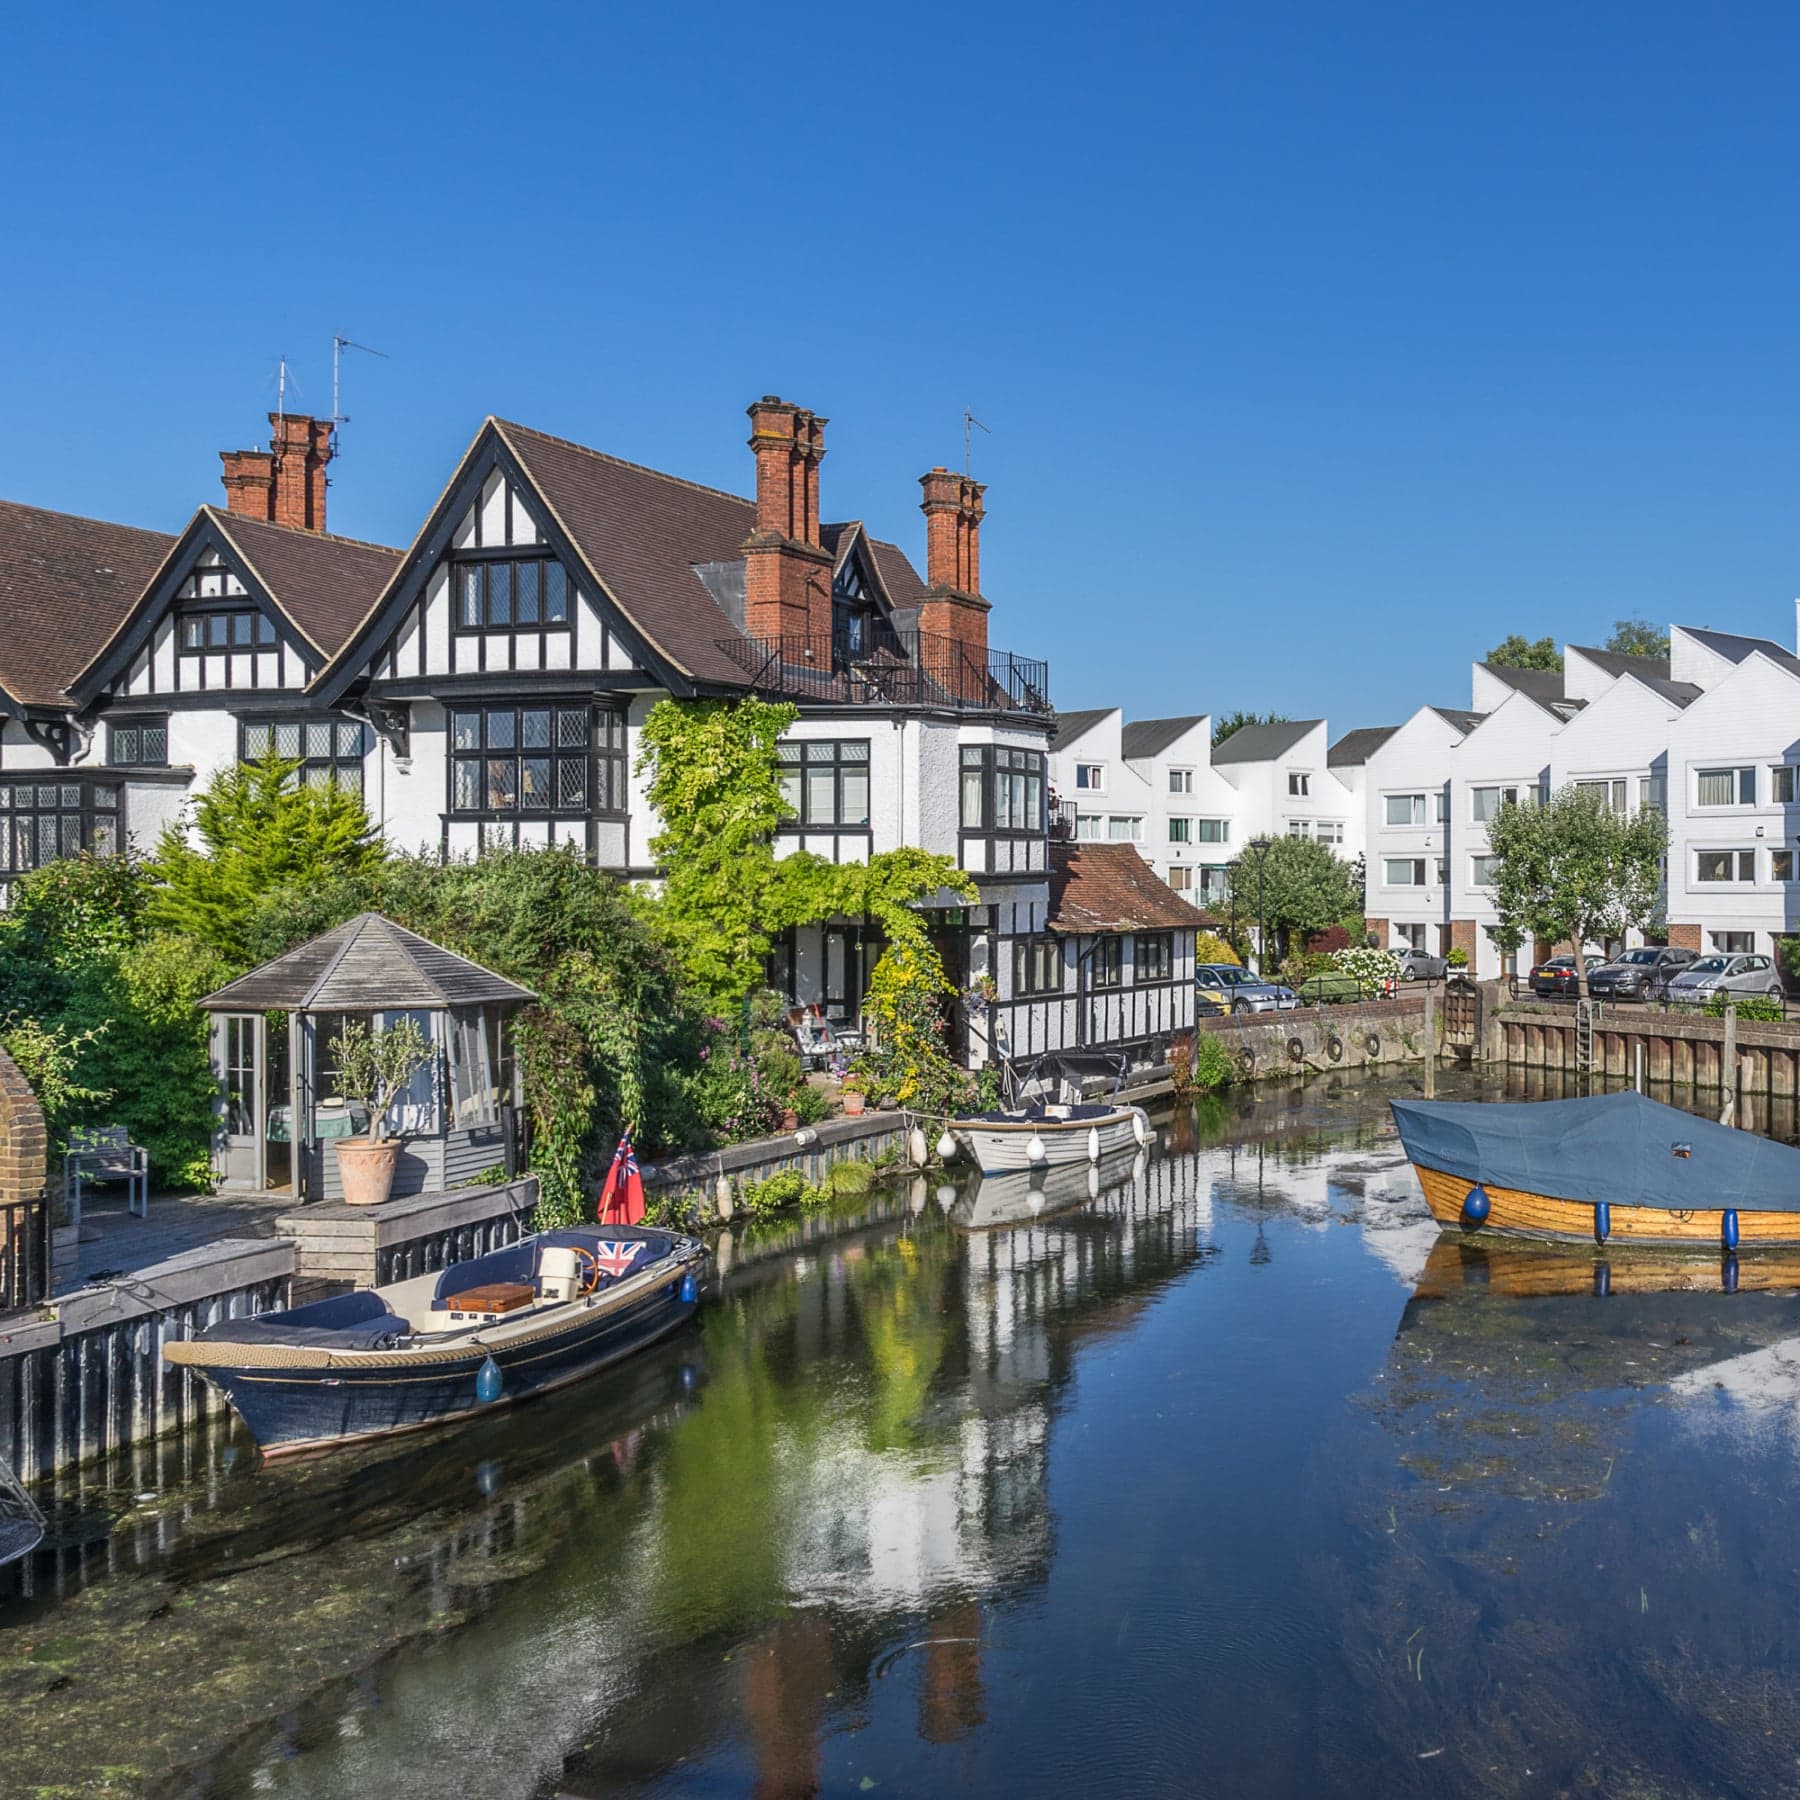 the pretty county of Buckinghamshire is an ideal destination to take a UK break